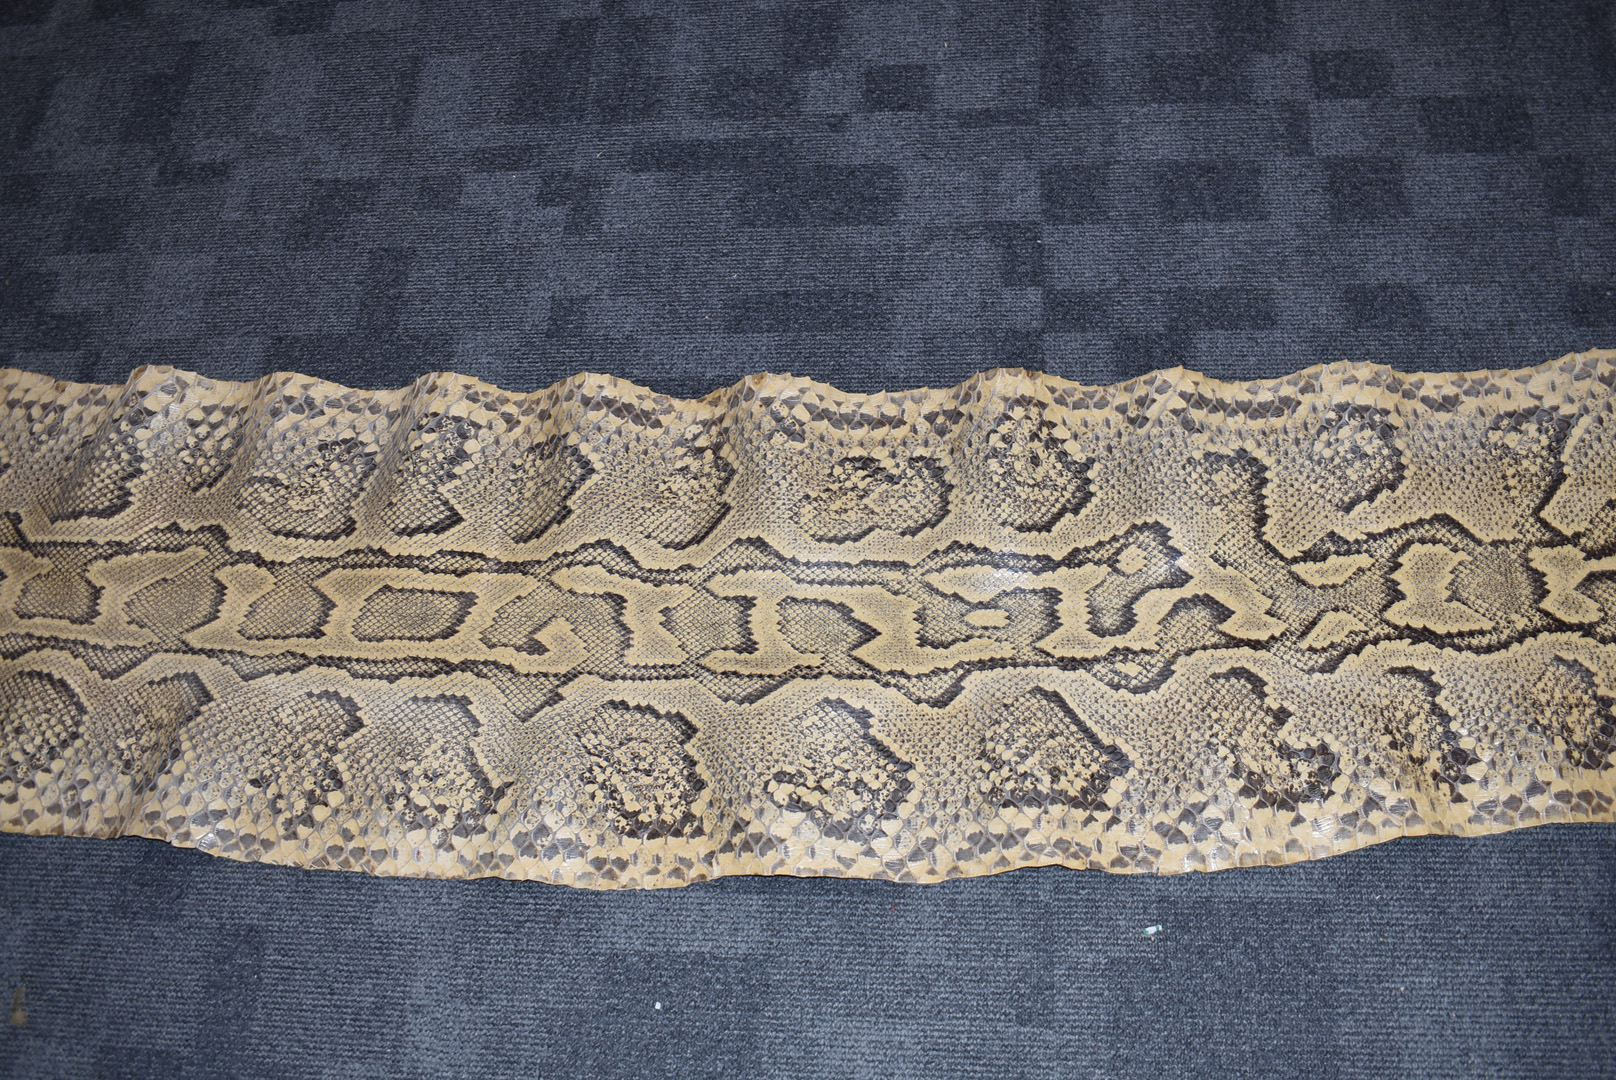 A large Python flat skin, (Pythonidae), laid on backing material, with Made in Switzerland stamp, - Bild 5 aus 8